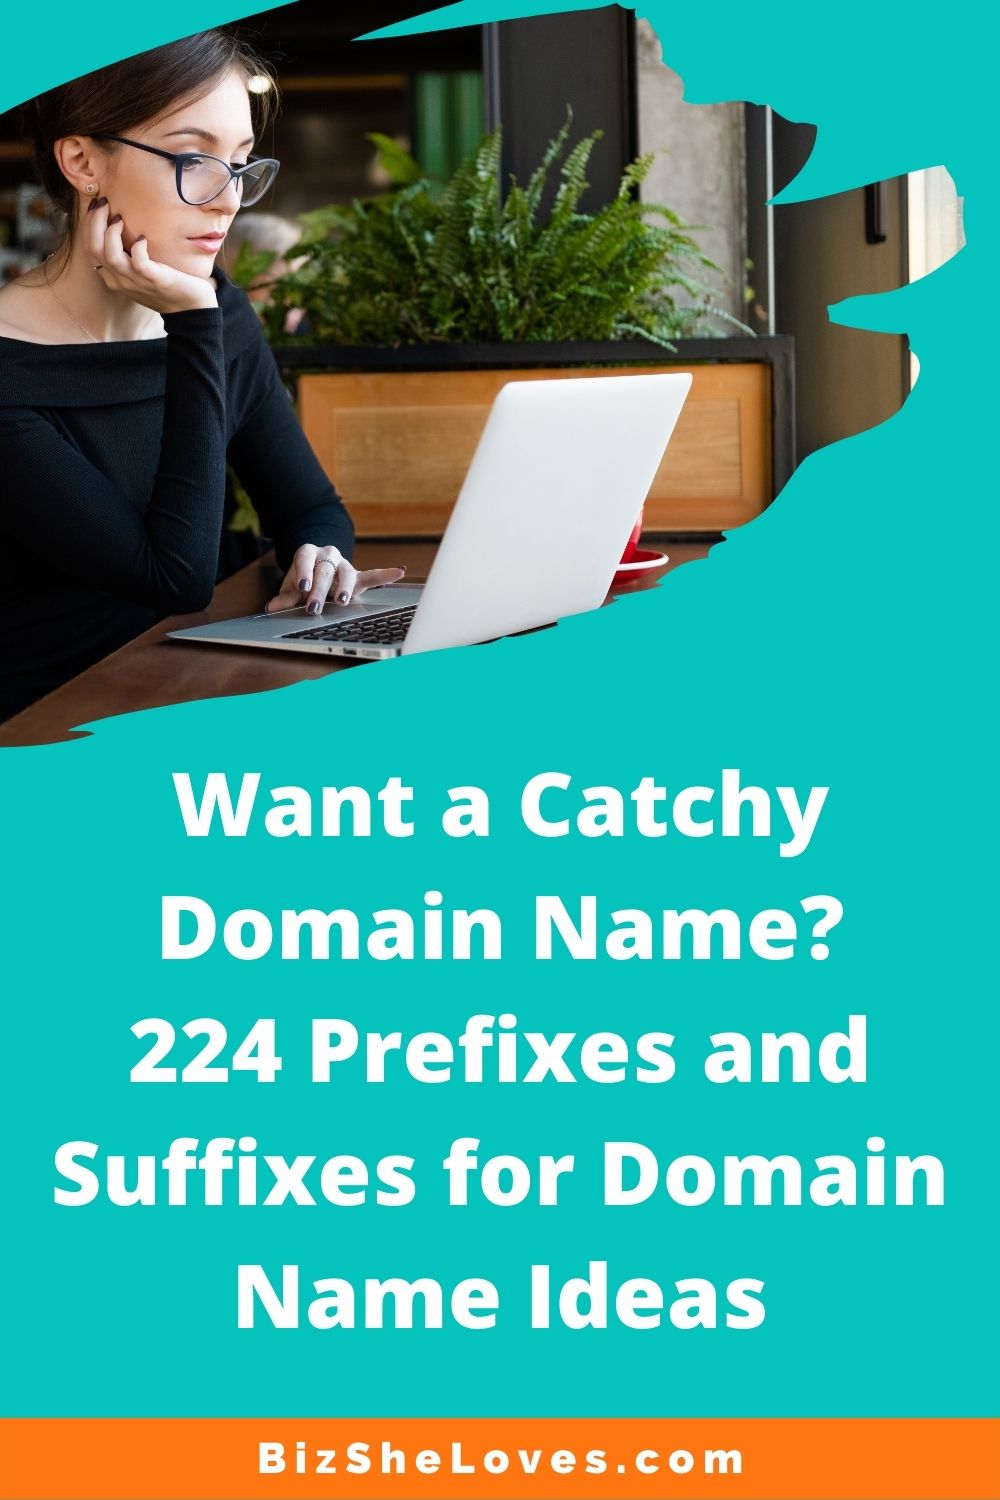 Can't Find a Domain Name? 224 Prefixes and Suffixes for Domain Name Ideas